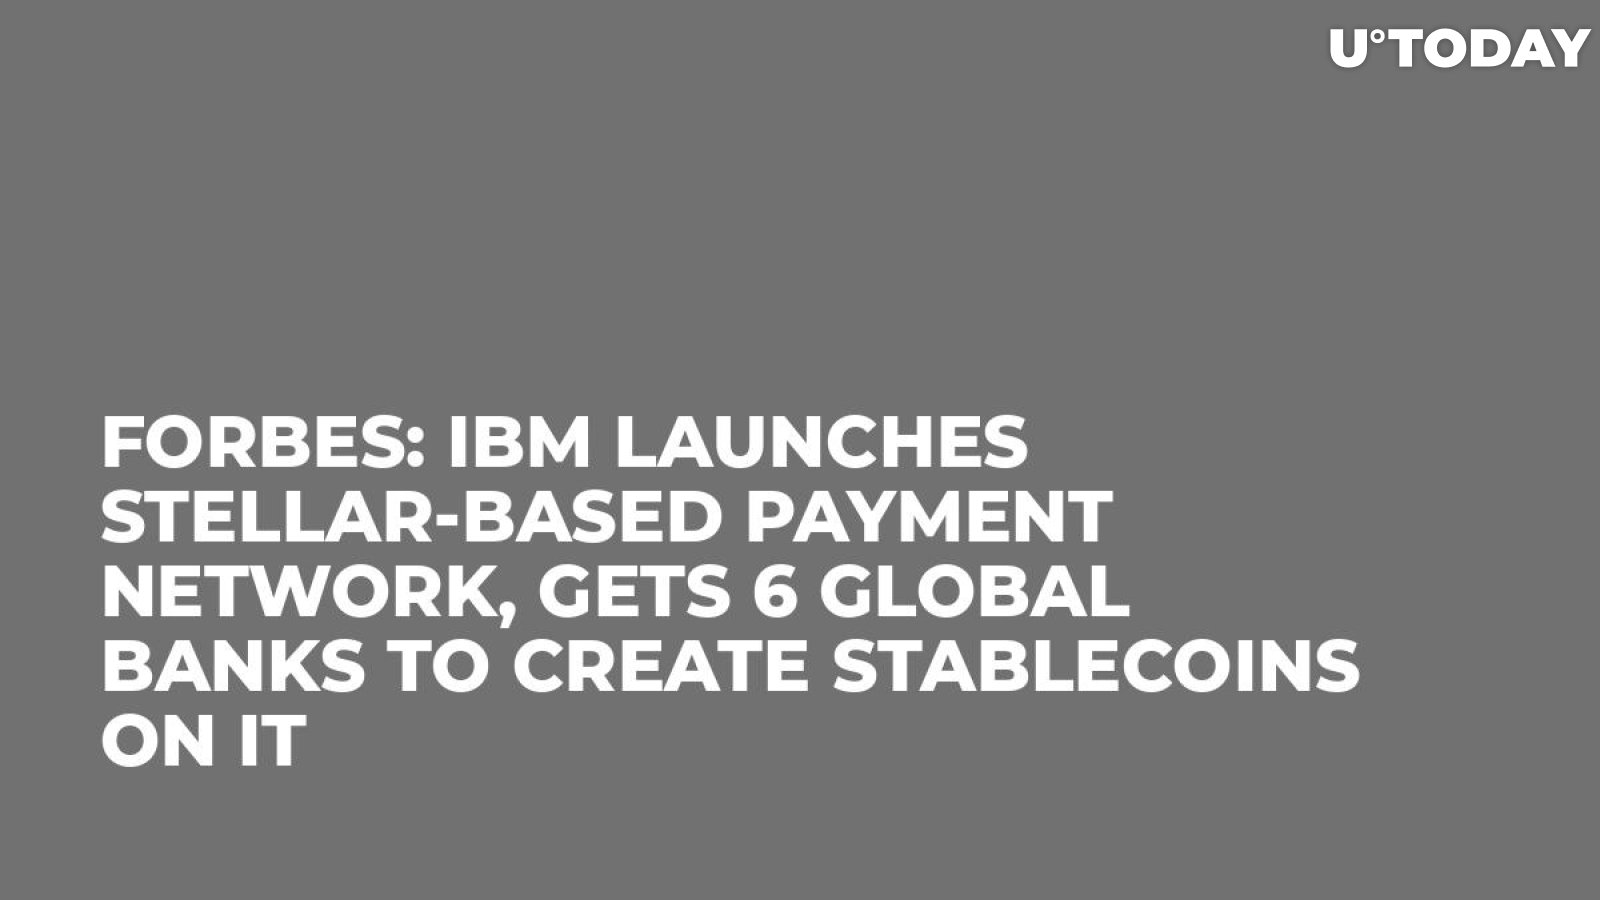 Forbes: IBM Launches Stellar-Based Payment Network, Gets 6 Global Banks to Create Stablecoins on It